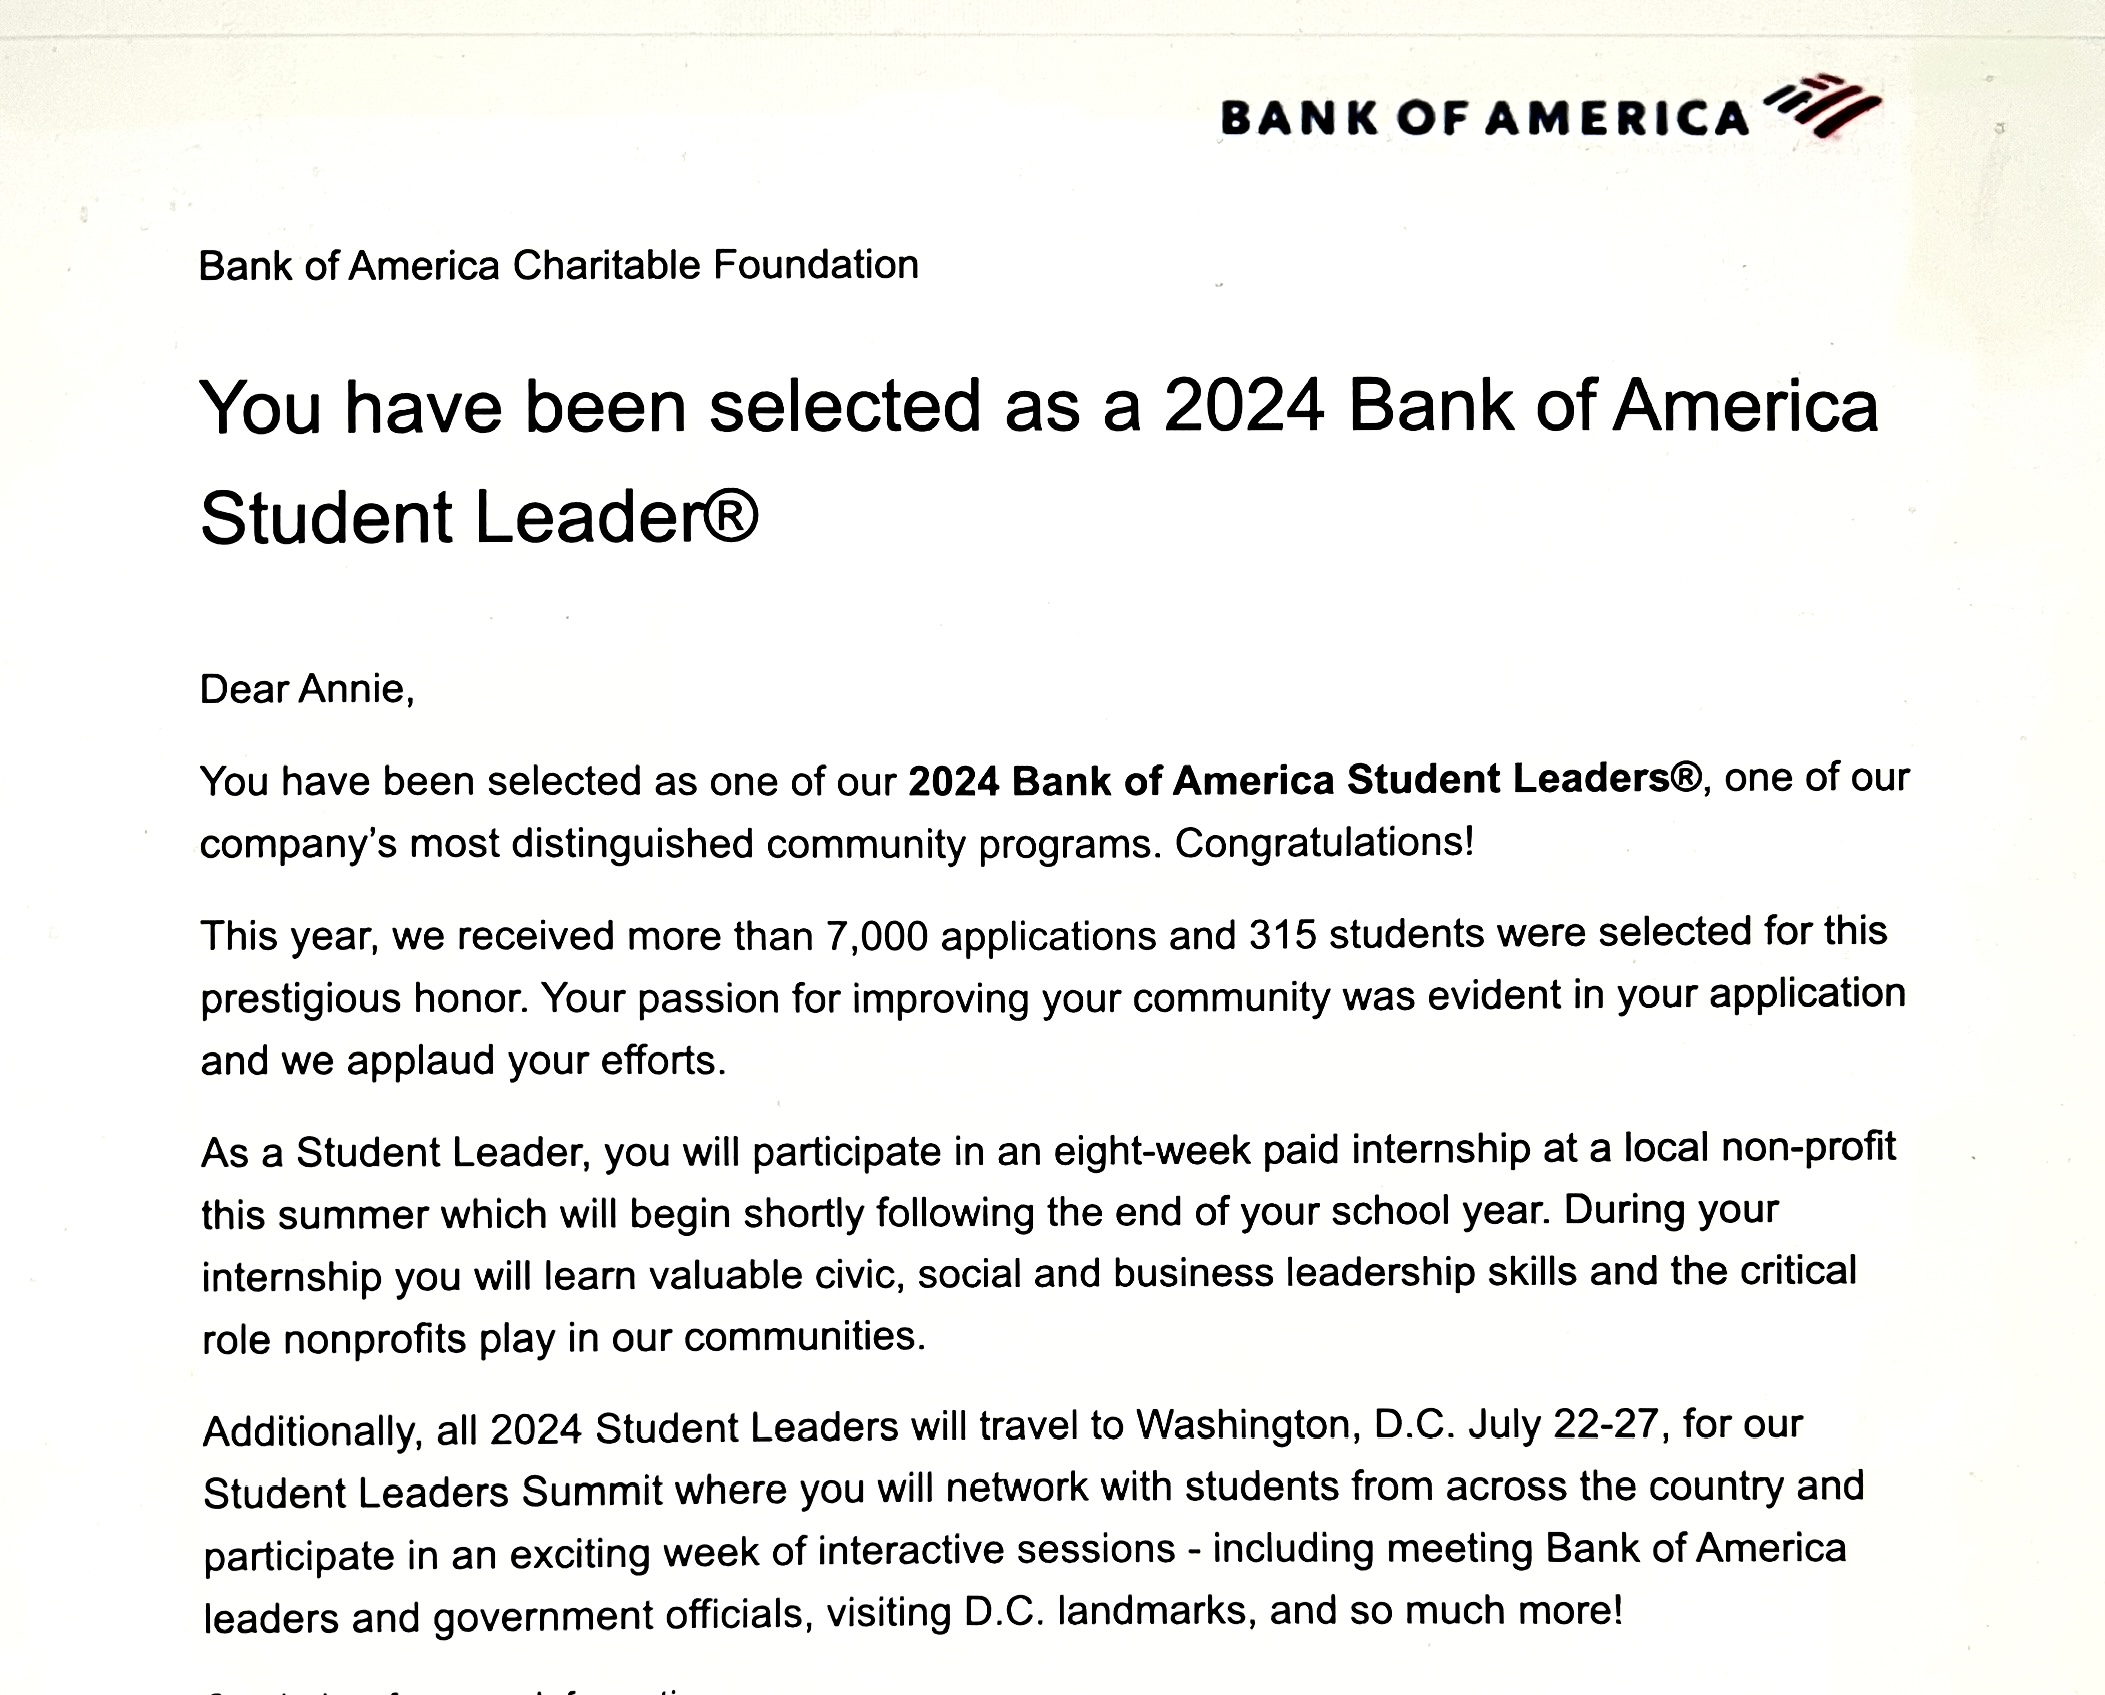 Acceptance Letter from BOA